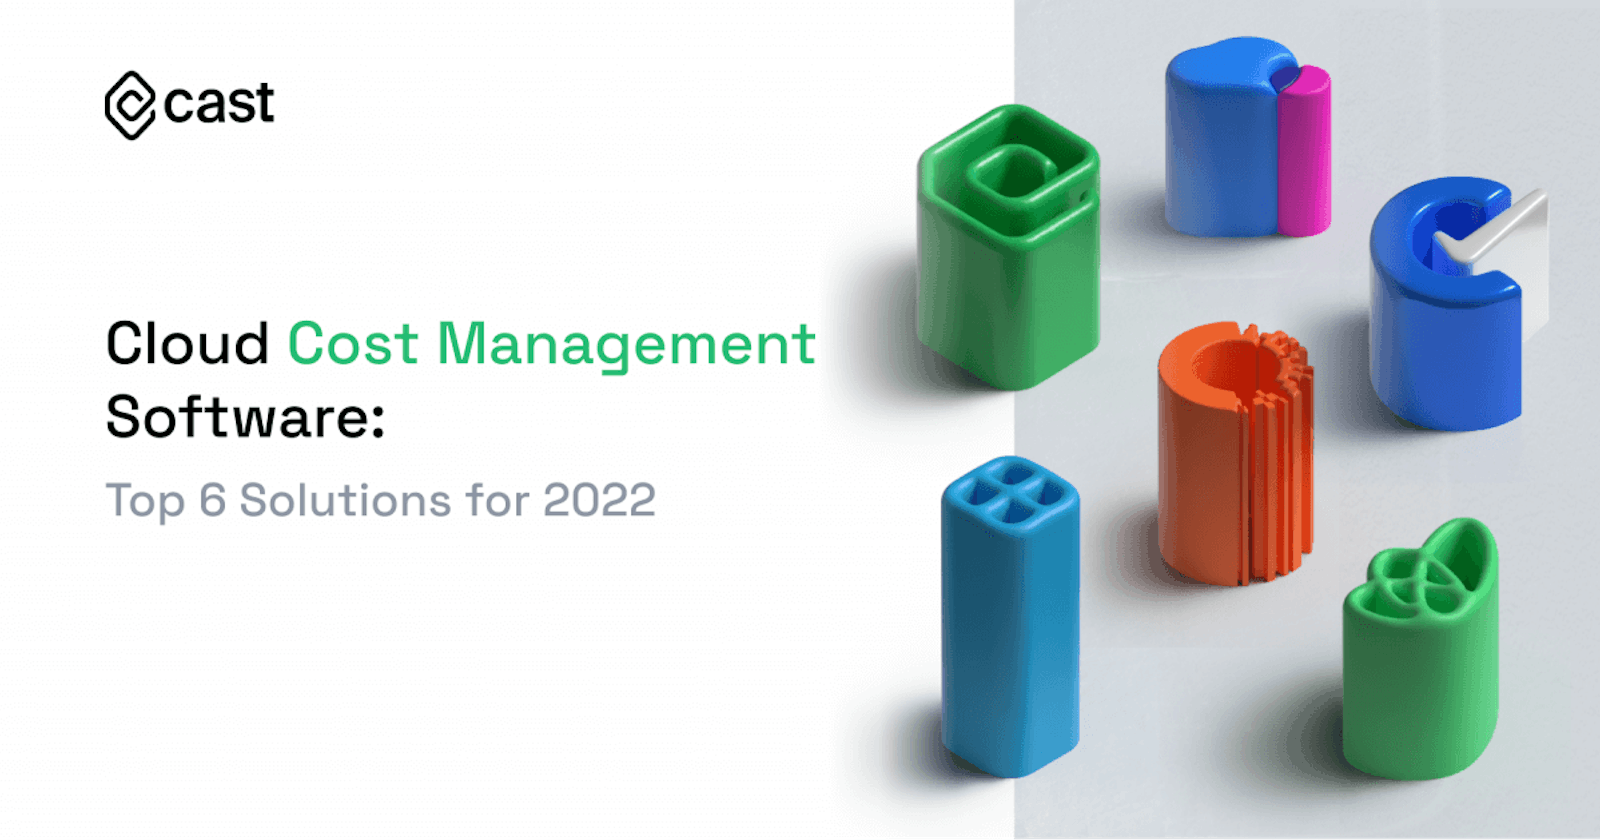 Cloud Cost Management Software: Top 6 Solutions for 2022